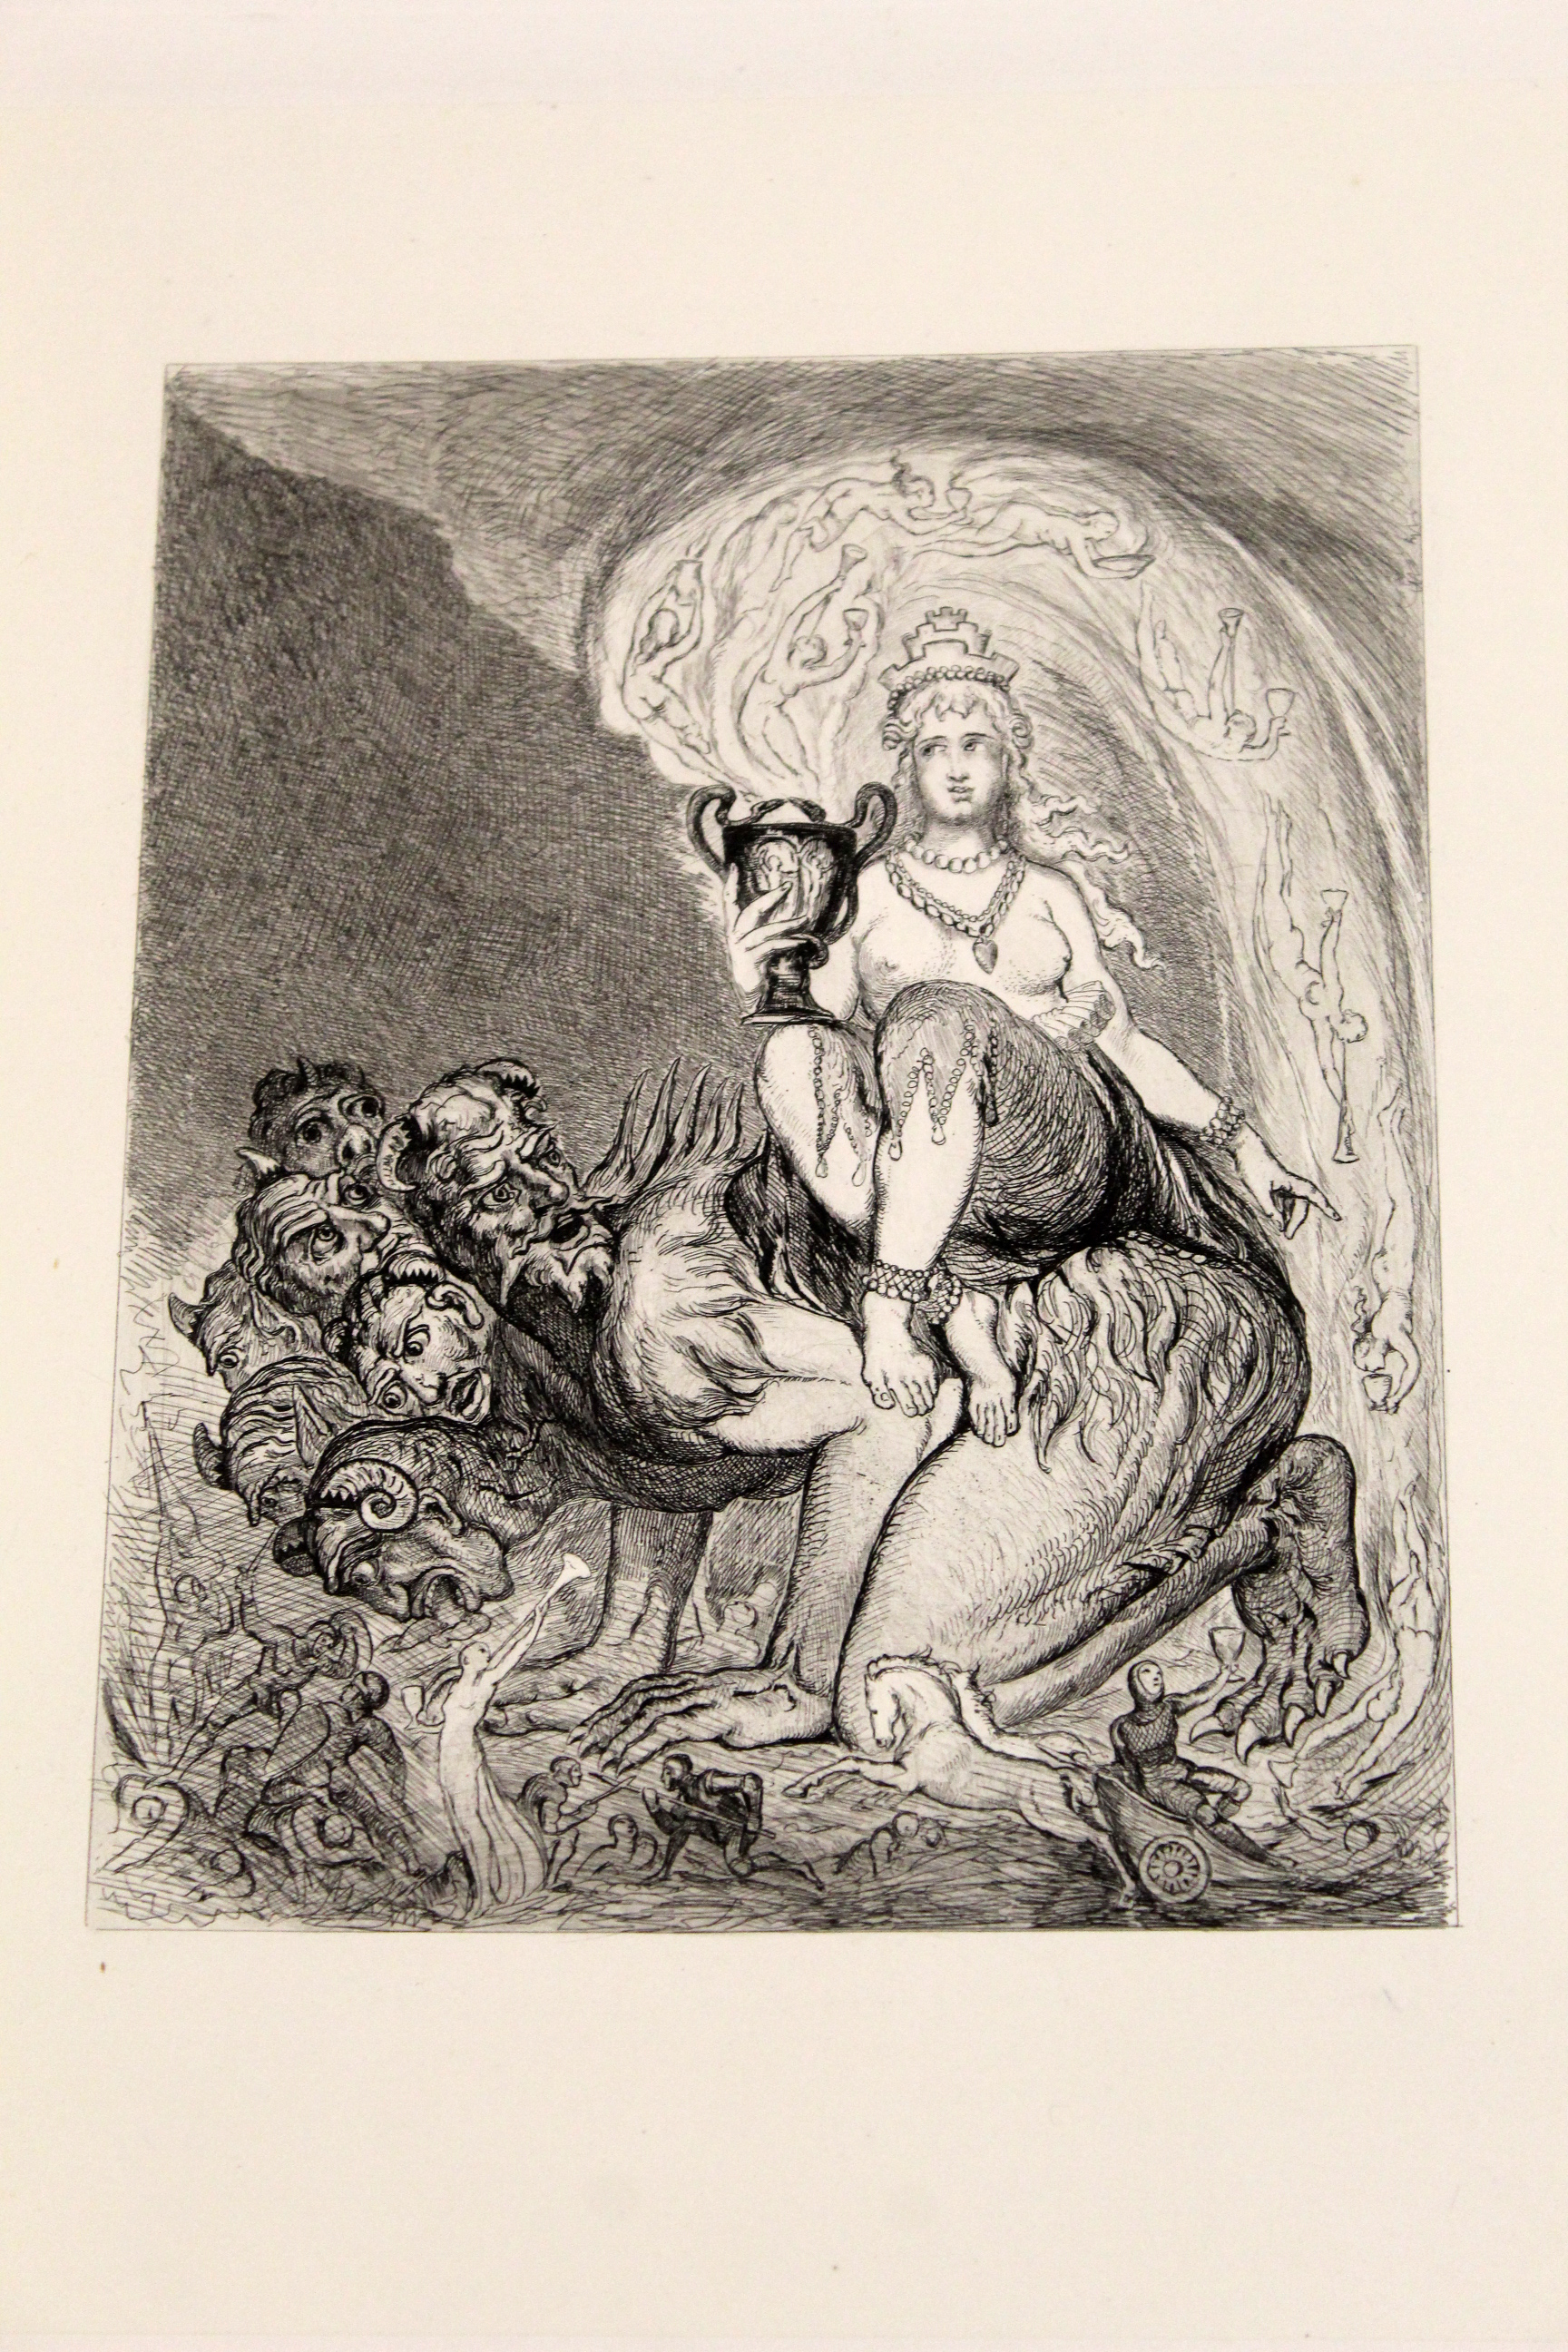 WILLIAM BELL SCOTT: WILLIAM BLAKE, ETCHINGS FROM HIS WORKS, London, Chatto & Windus, 1878, 1st - Image 3 of 4